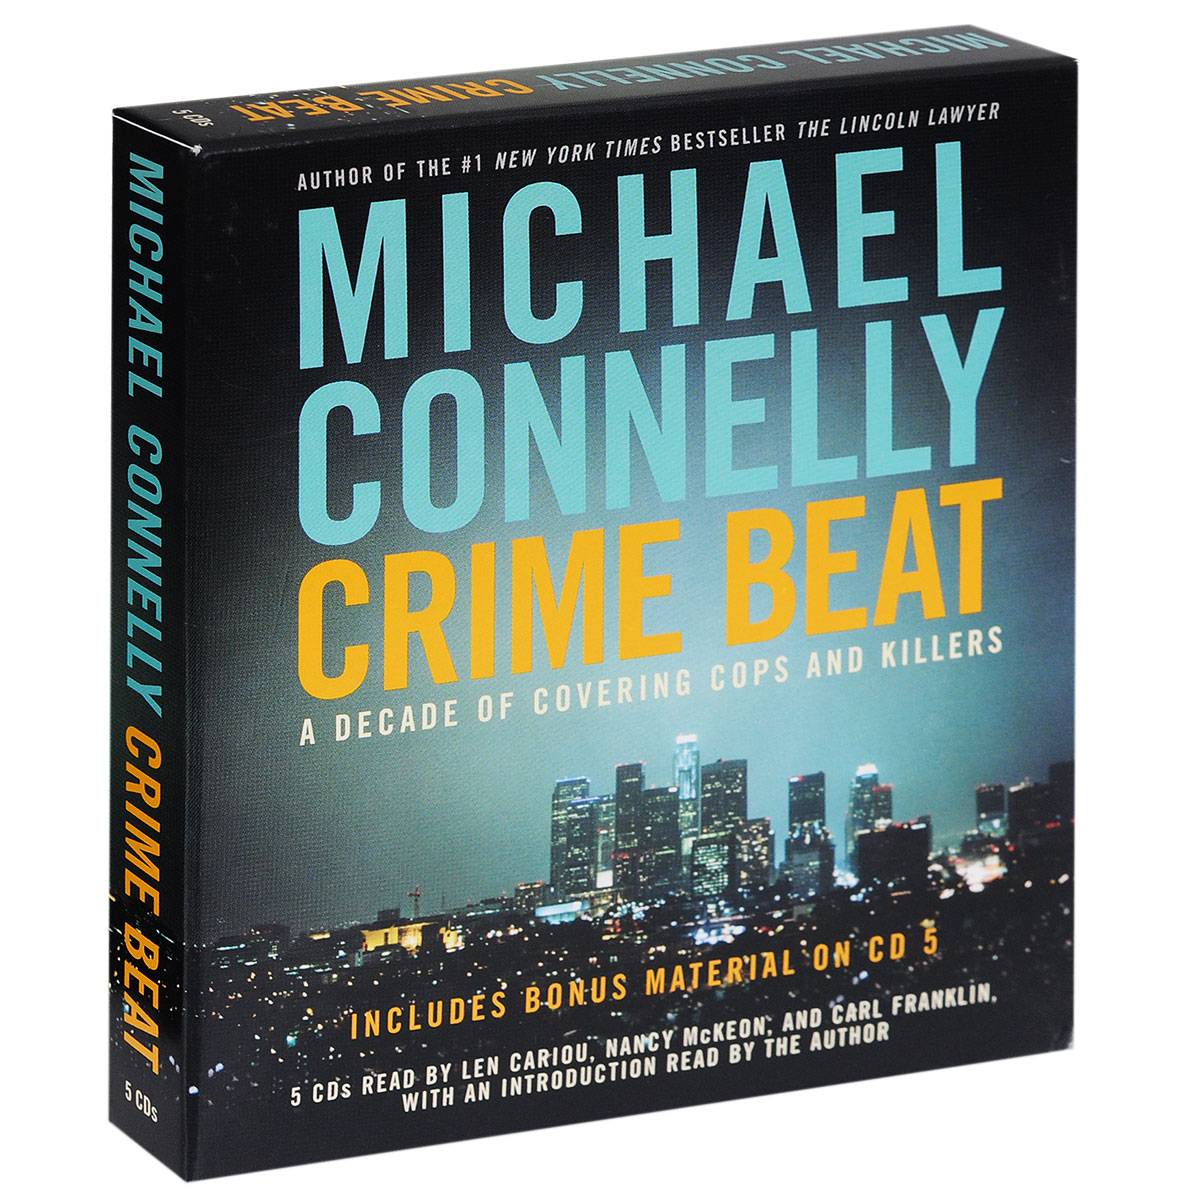 Crime Beat: A Decade of Covering Cops and Killers (аудиокнига на 5 CD)